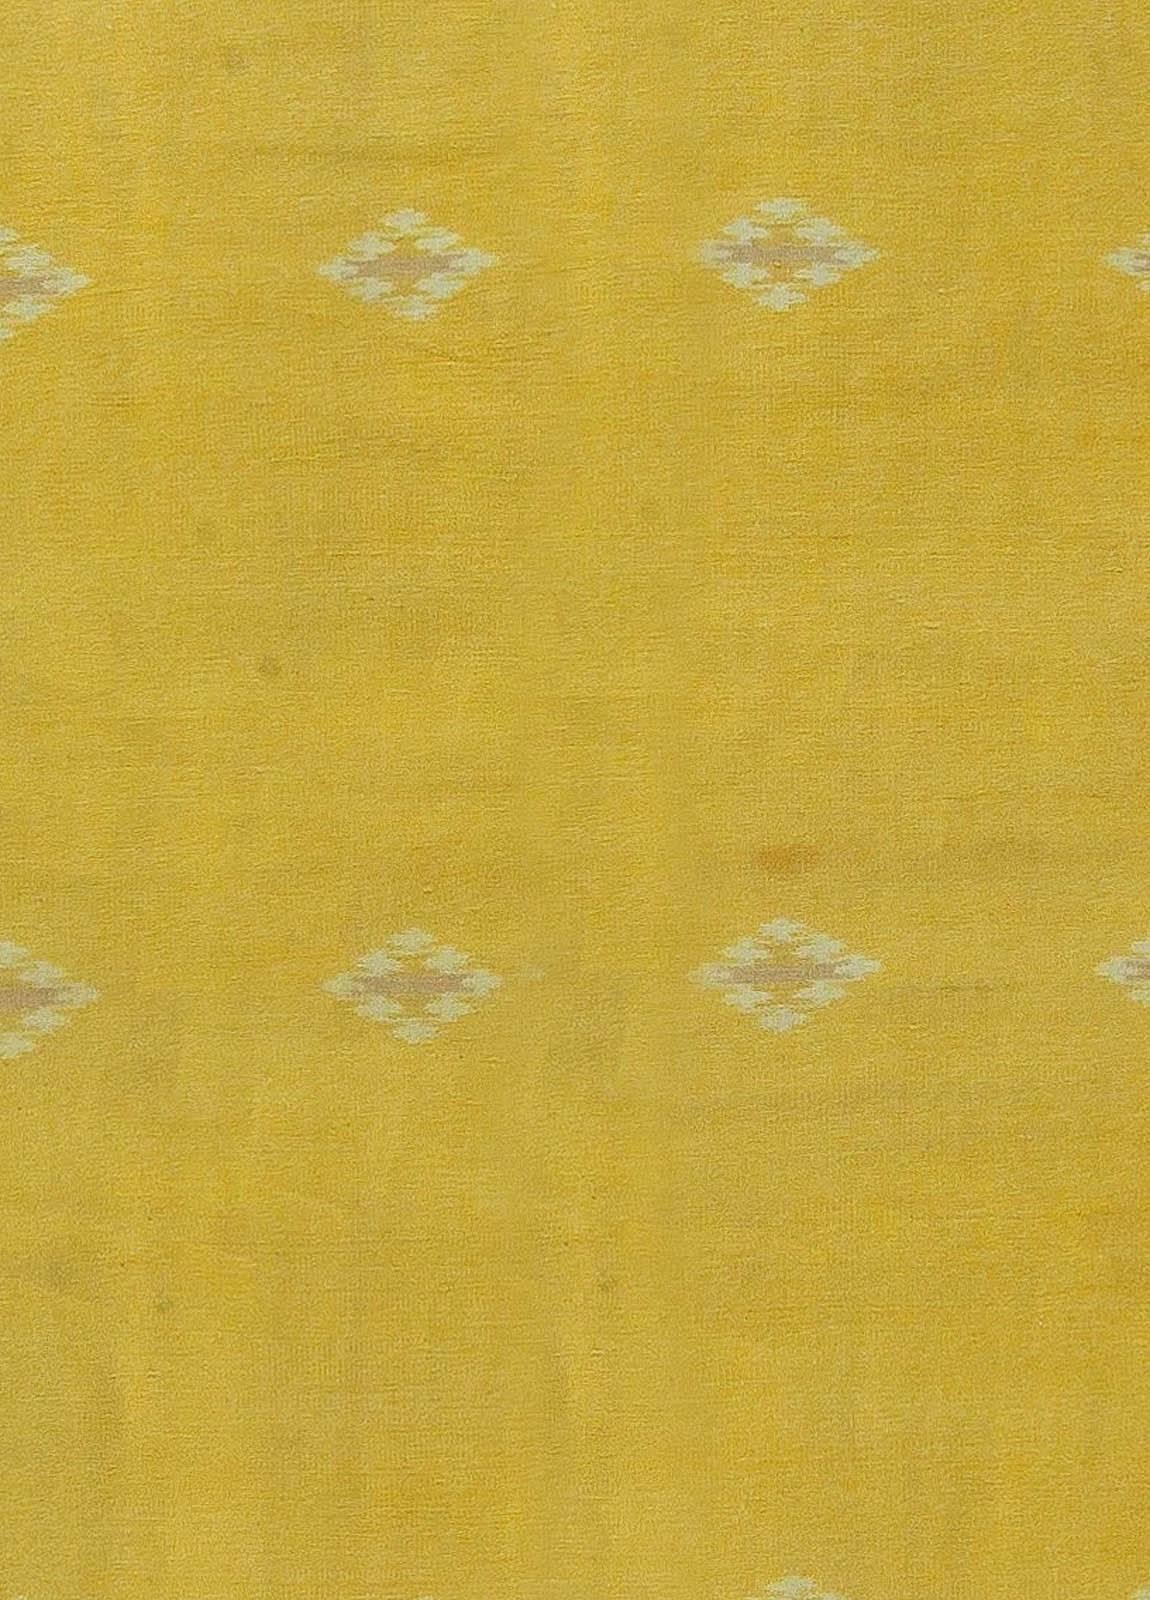 Mid-20th Century Yellow Indian Dhurrie Flat-Woven Rug 
Size: 8'2